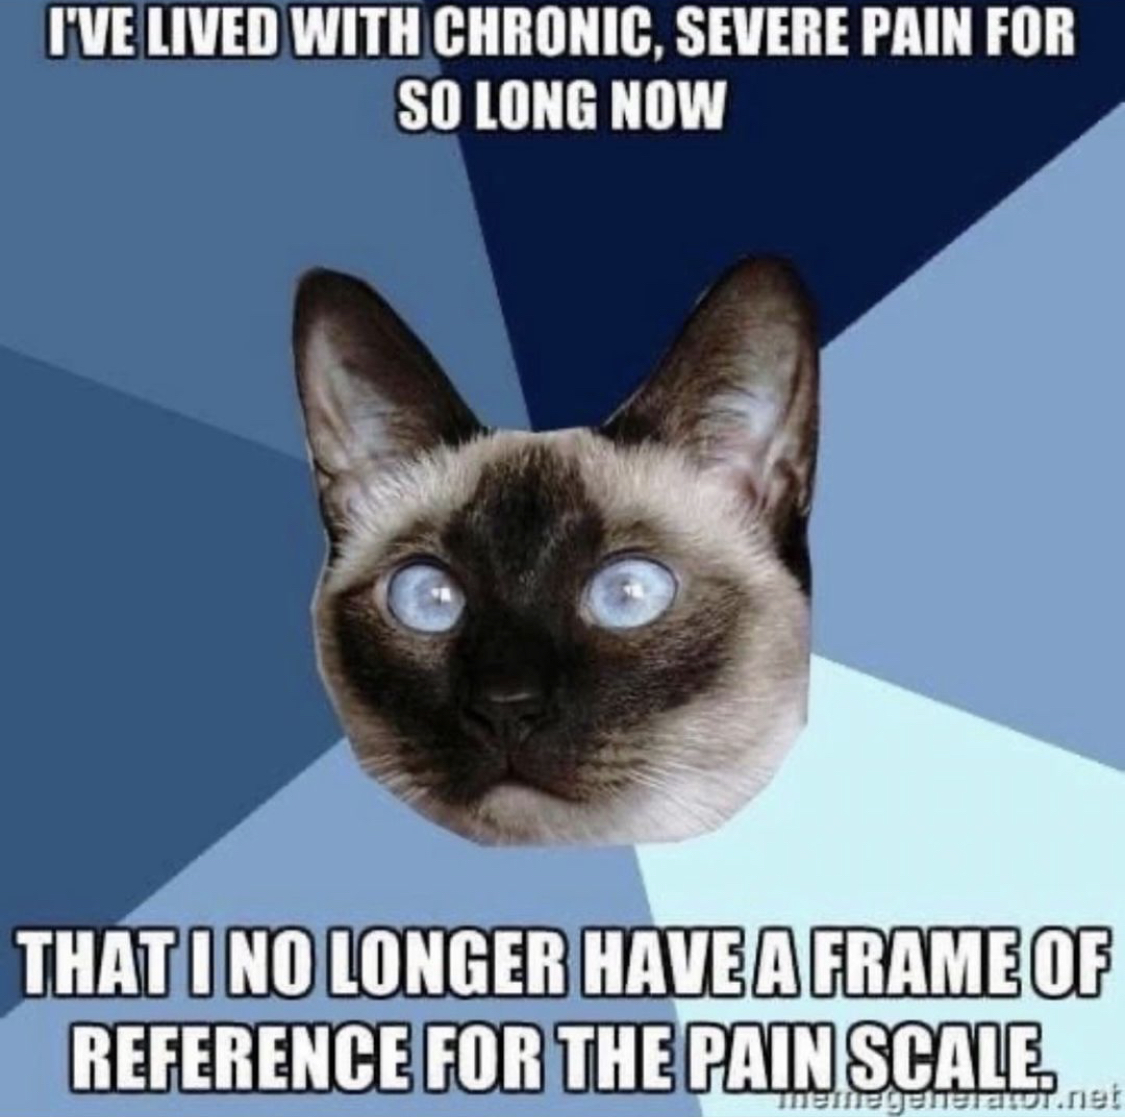 I find myself trying to negotiate with my body saying 'I know there has to be some pain, but could it be a bit less than this?' 

#chronicpain #autominnunedisease #invisibleillness  #LupusSucks #chronicillness #LupusLife #lupuswarrior #lupus #lupustrust #lupusawareness